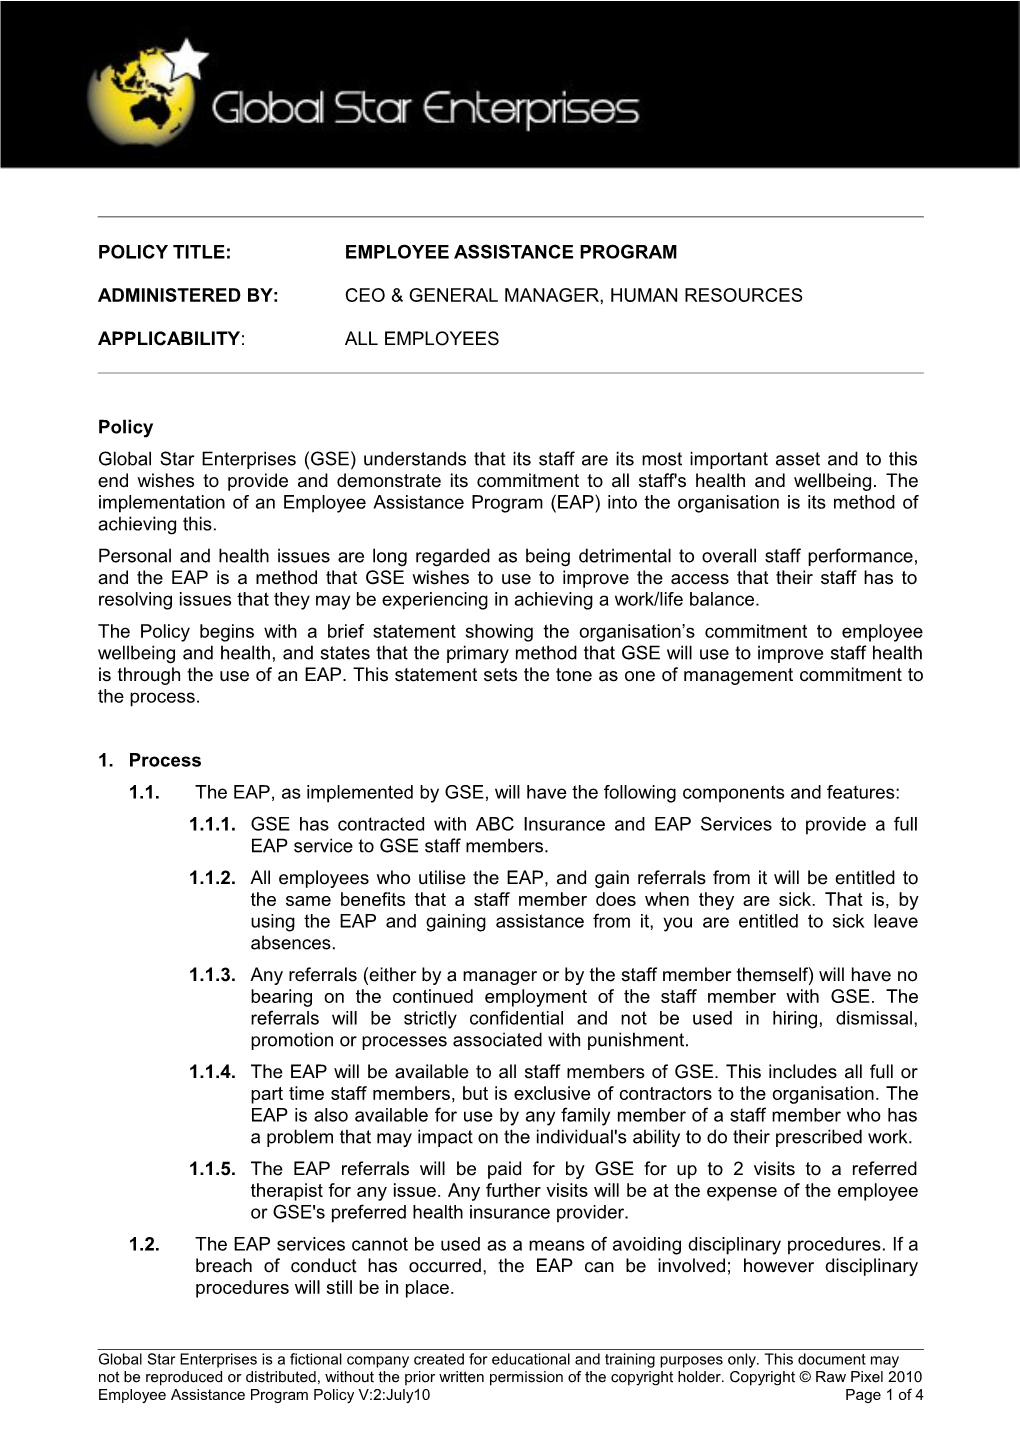 Policy Title: Employee Assistance Program